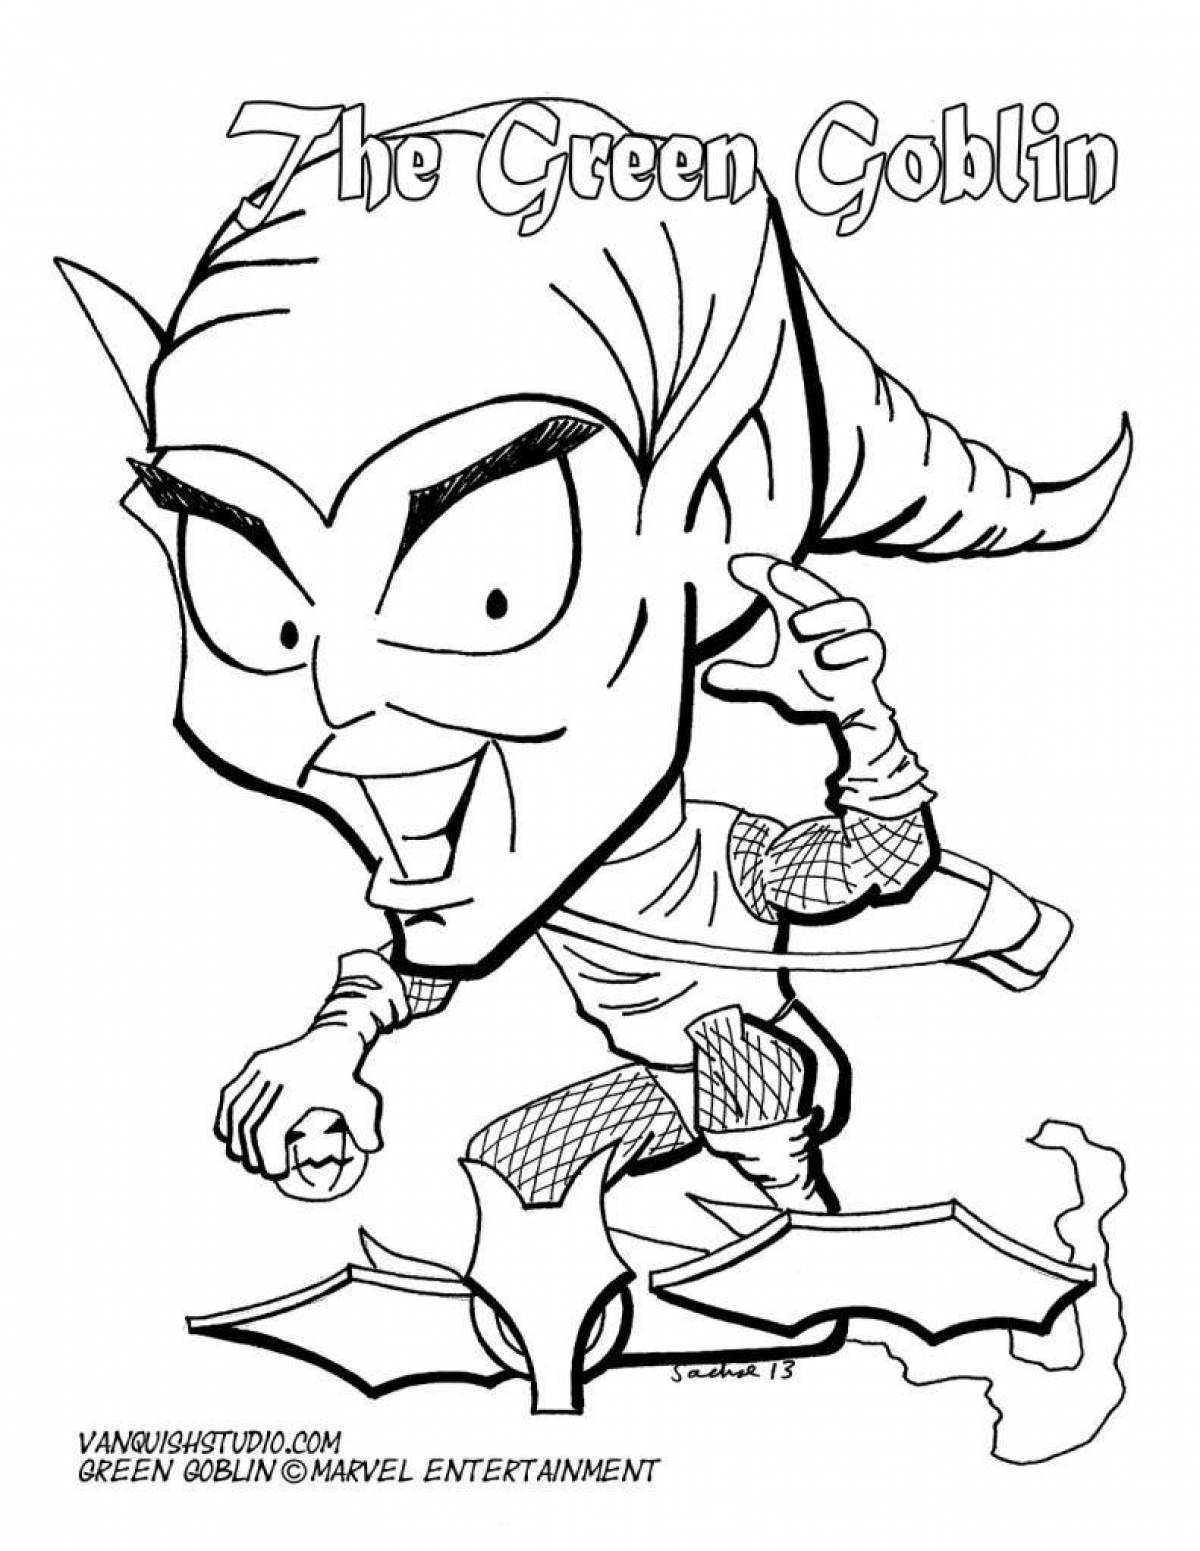 Playful goblin coloring page for kids